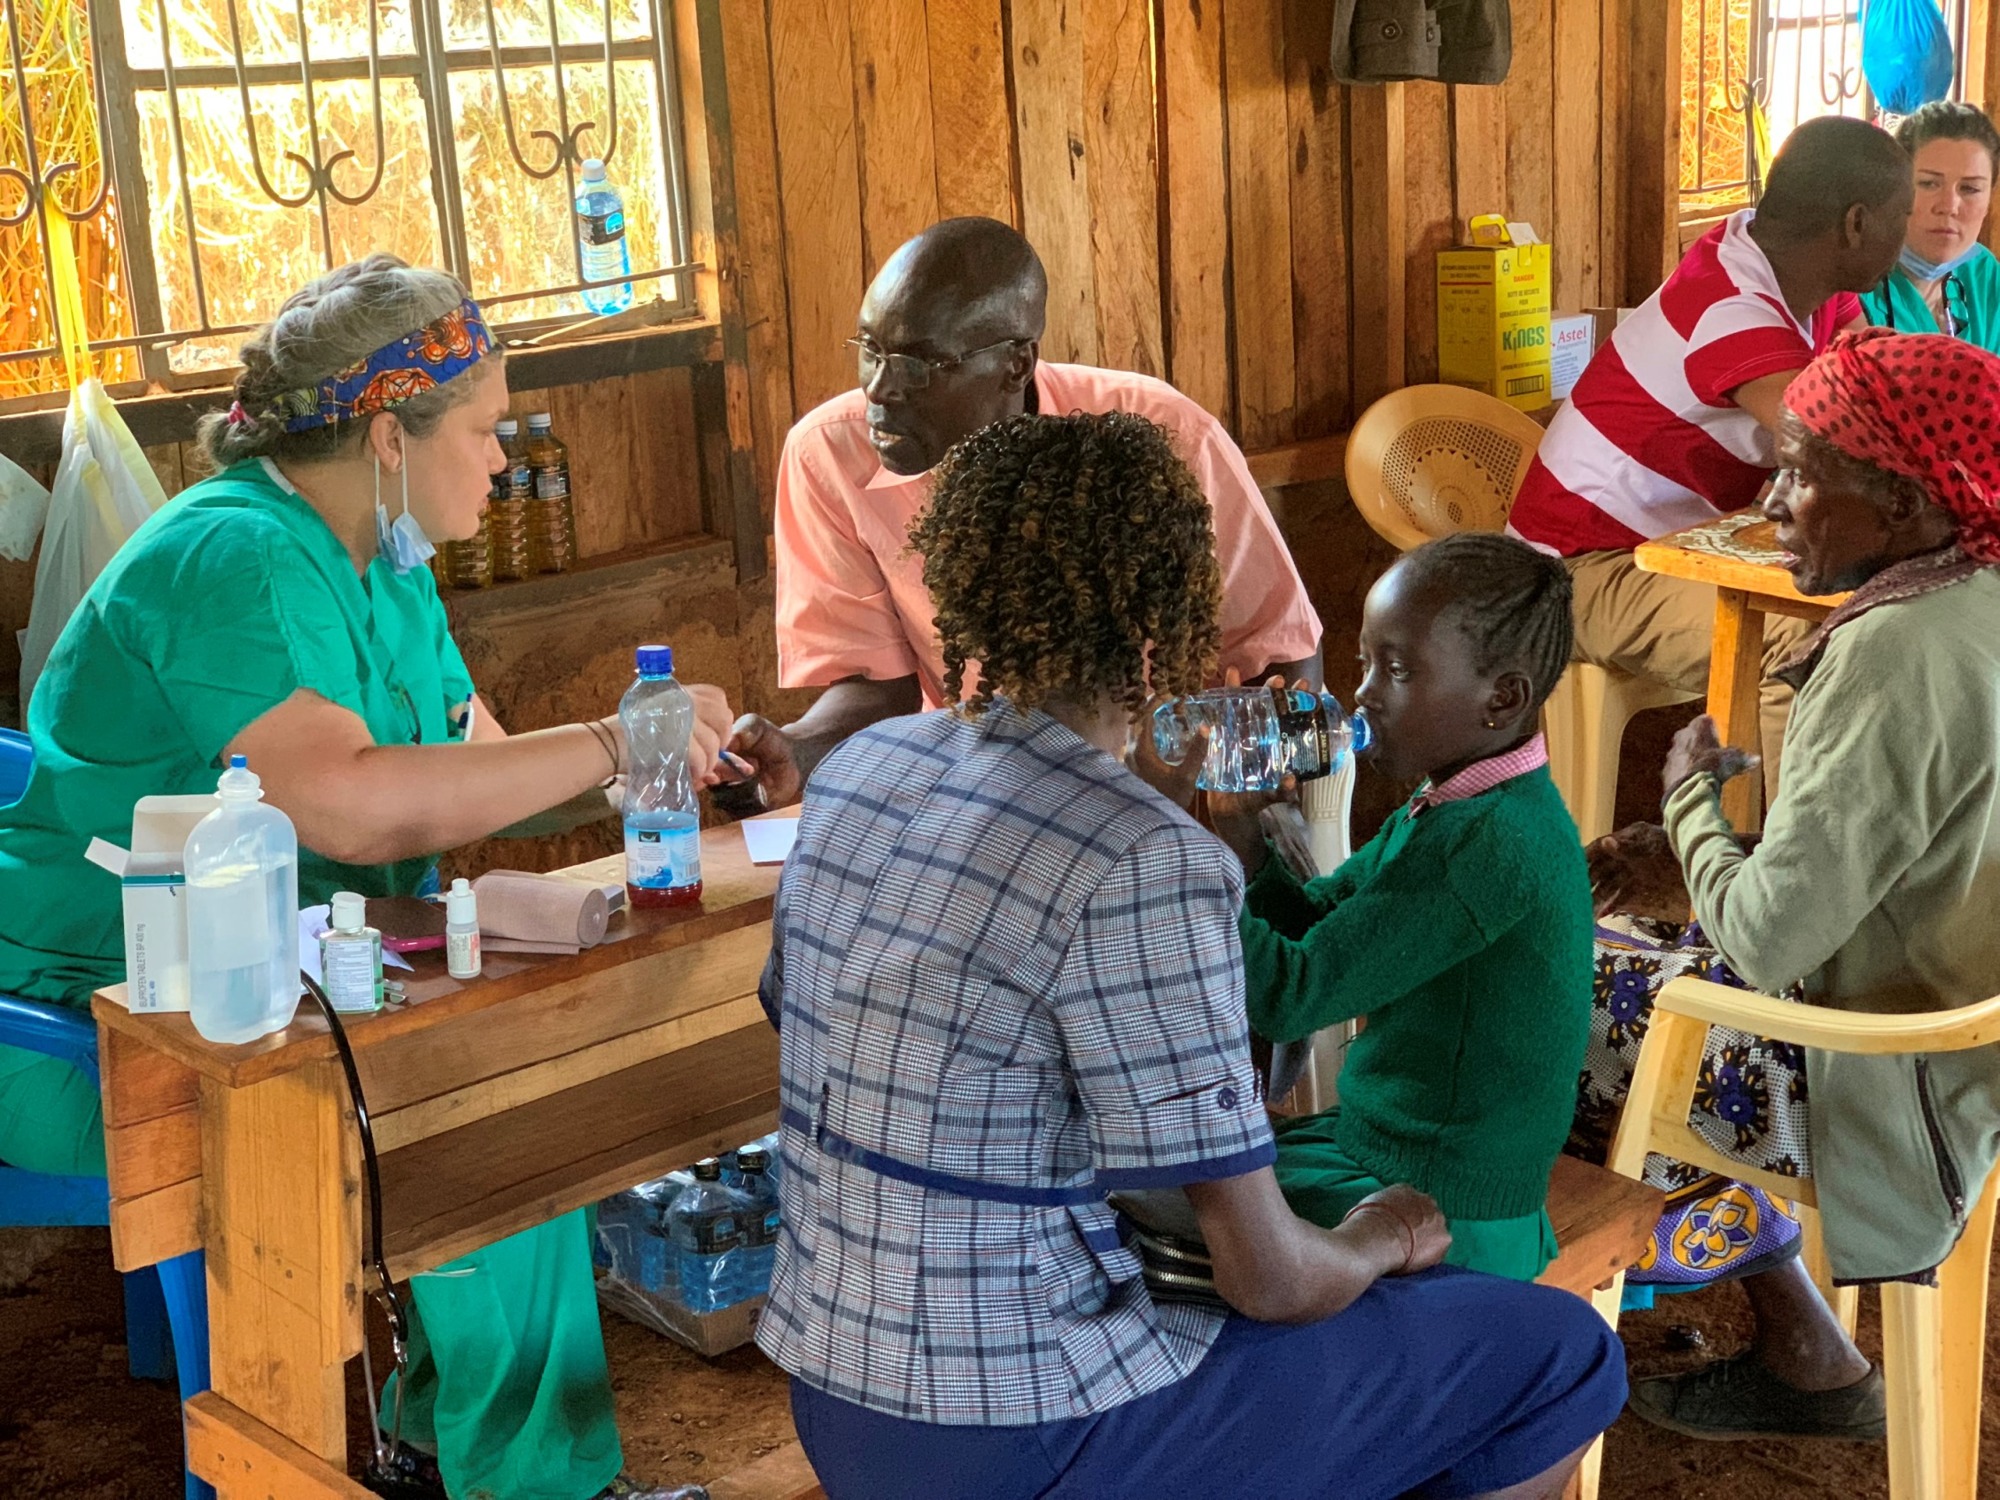 AdventHealth Daytona Beach employees volunteered for a mission trip to Africa, caring for thousands during medical clinics in villages throughout Kenya. Shown is Kandace Vagovic, a physician assistant.